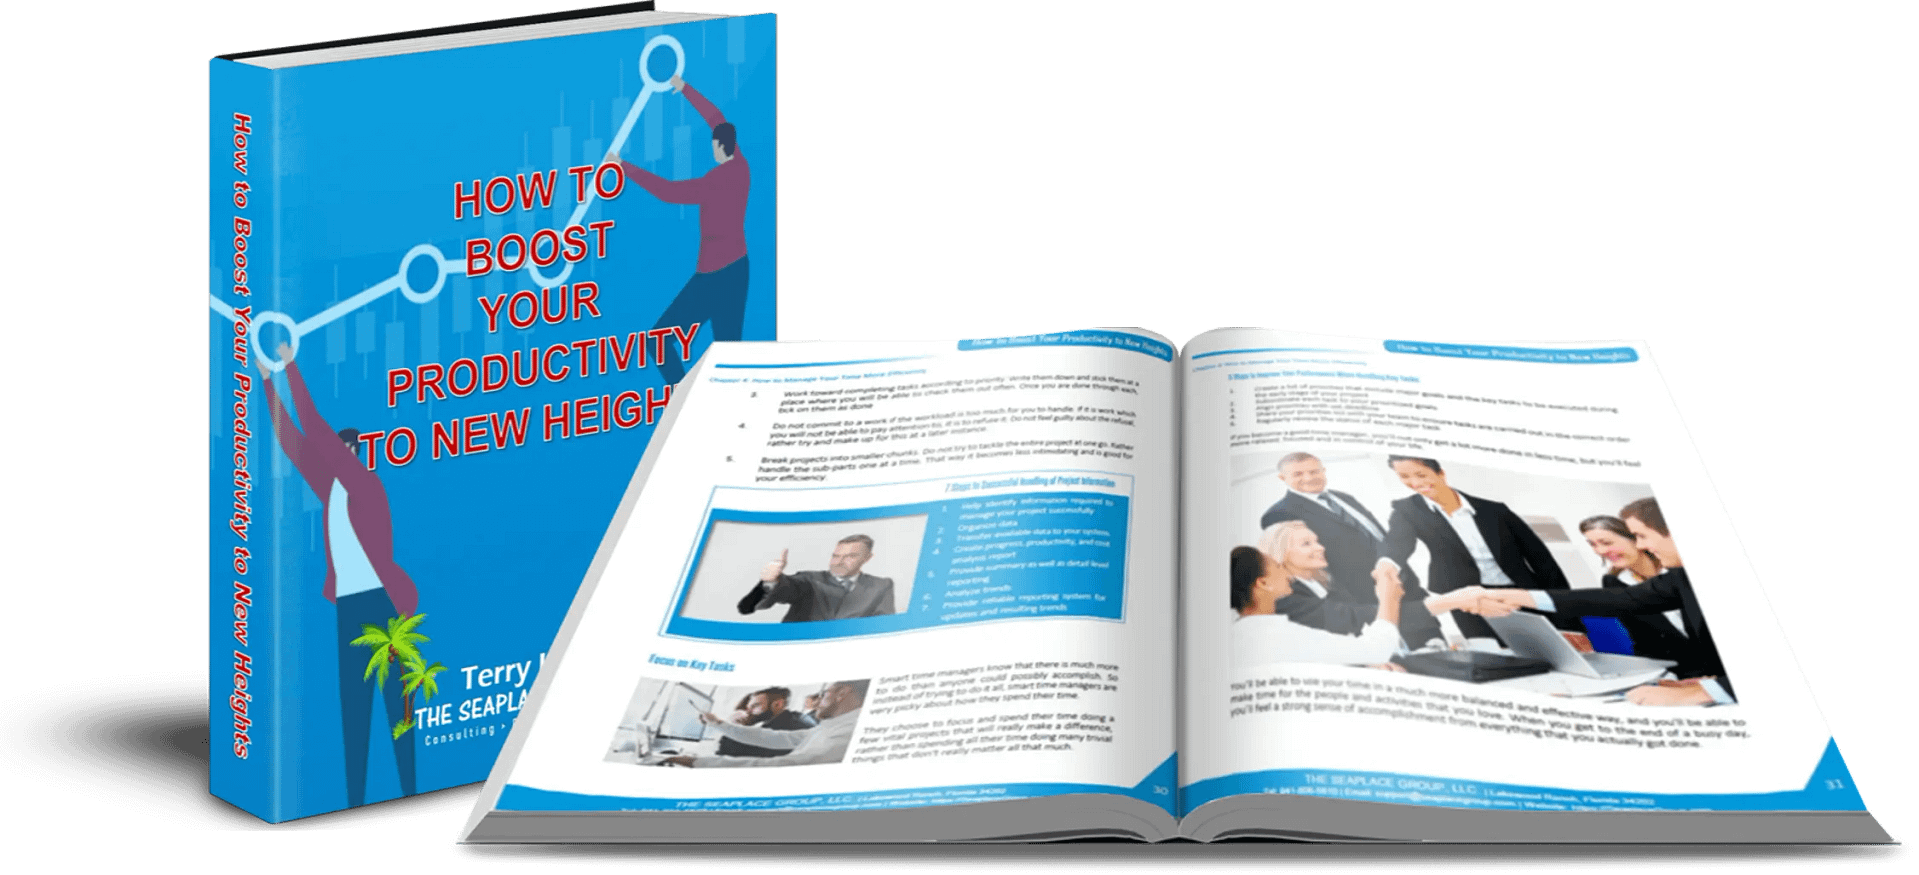 eBook, How to Boost Your Productivity to New Heights boils down to genuinely wanting to change, knowing what you want, and putting time-tested productivity principles to good use. Remember! Productivity starts with you!